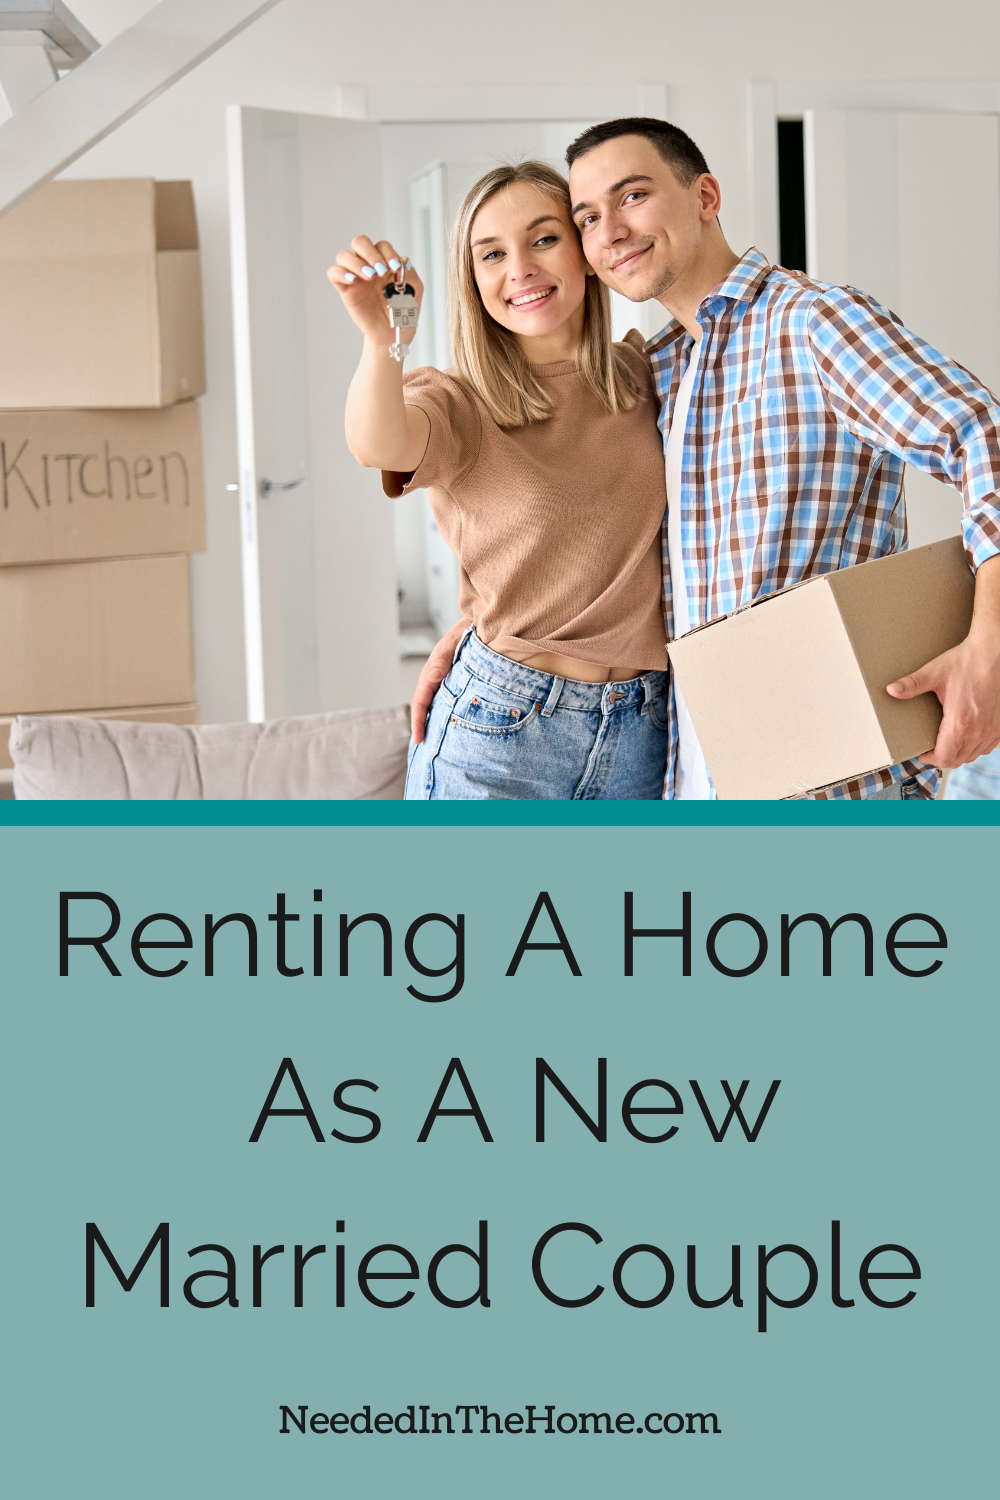 pinterest pin description renting a home as a new married couple smiling woman and man holding keys and a moving box neededinthehome